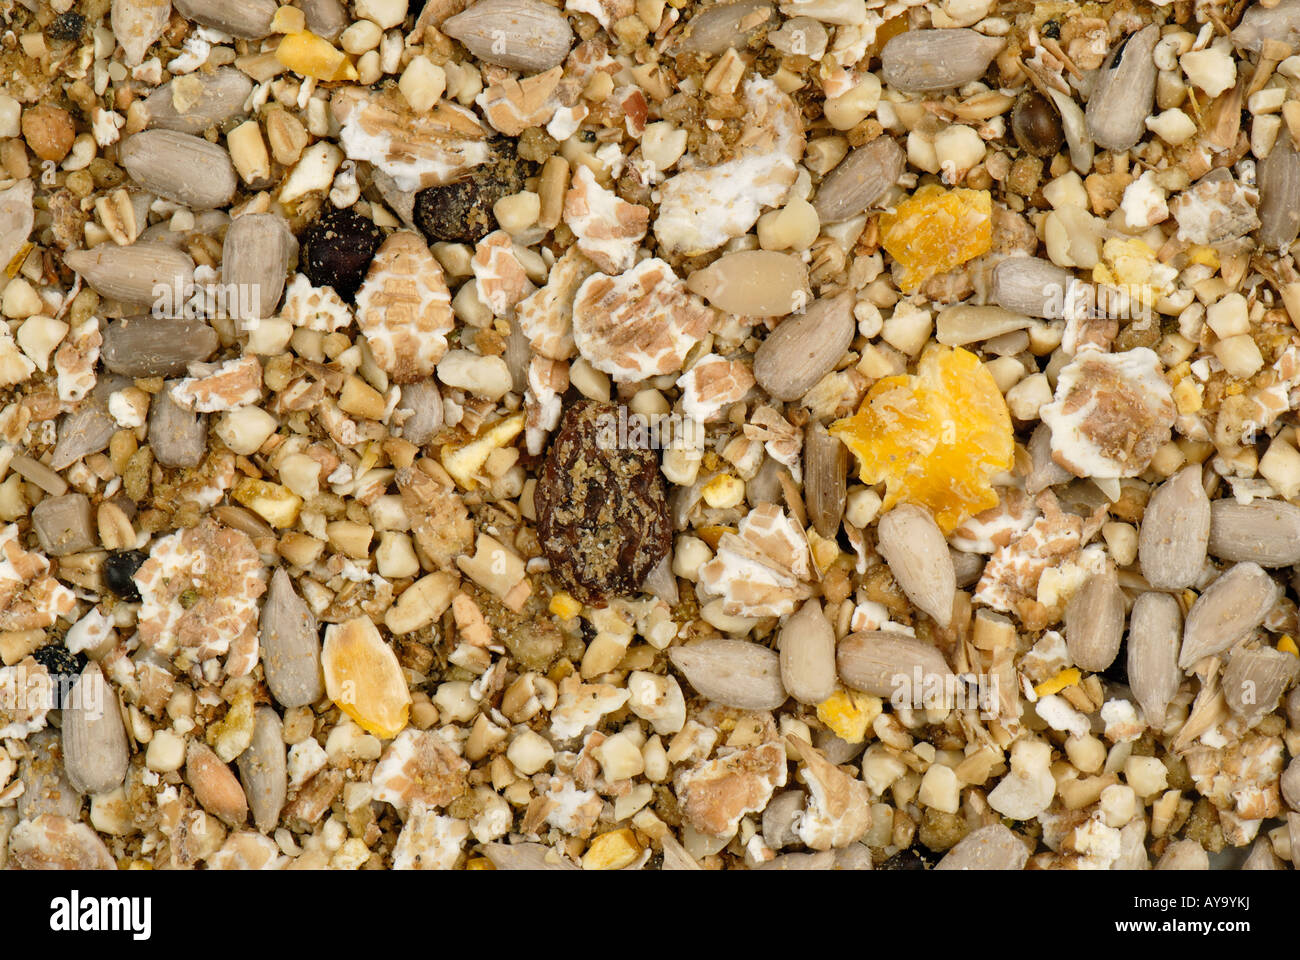 Wild bird feed for garden feeders with pine nuts crushed cereal grains and various seeds Stock Photo